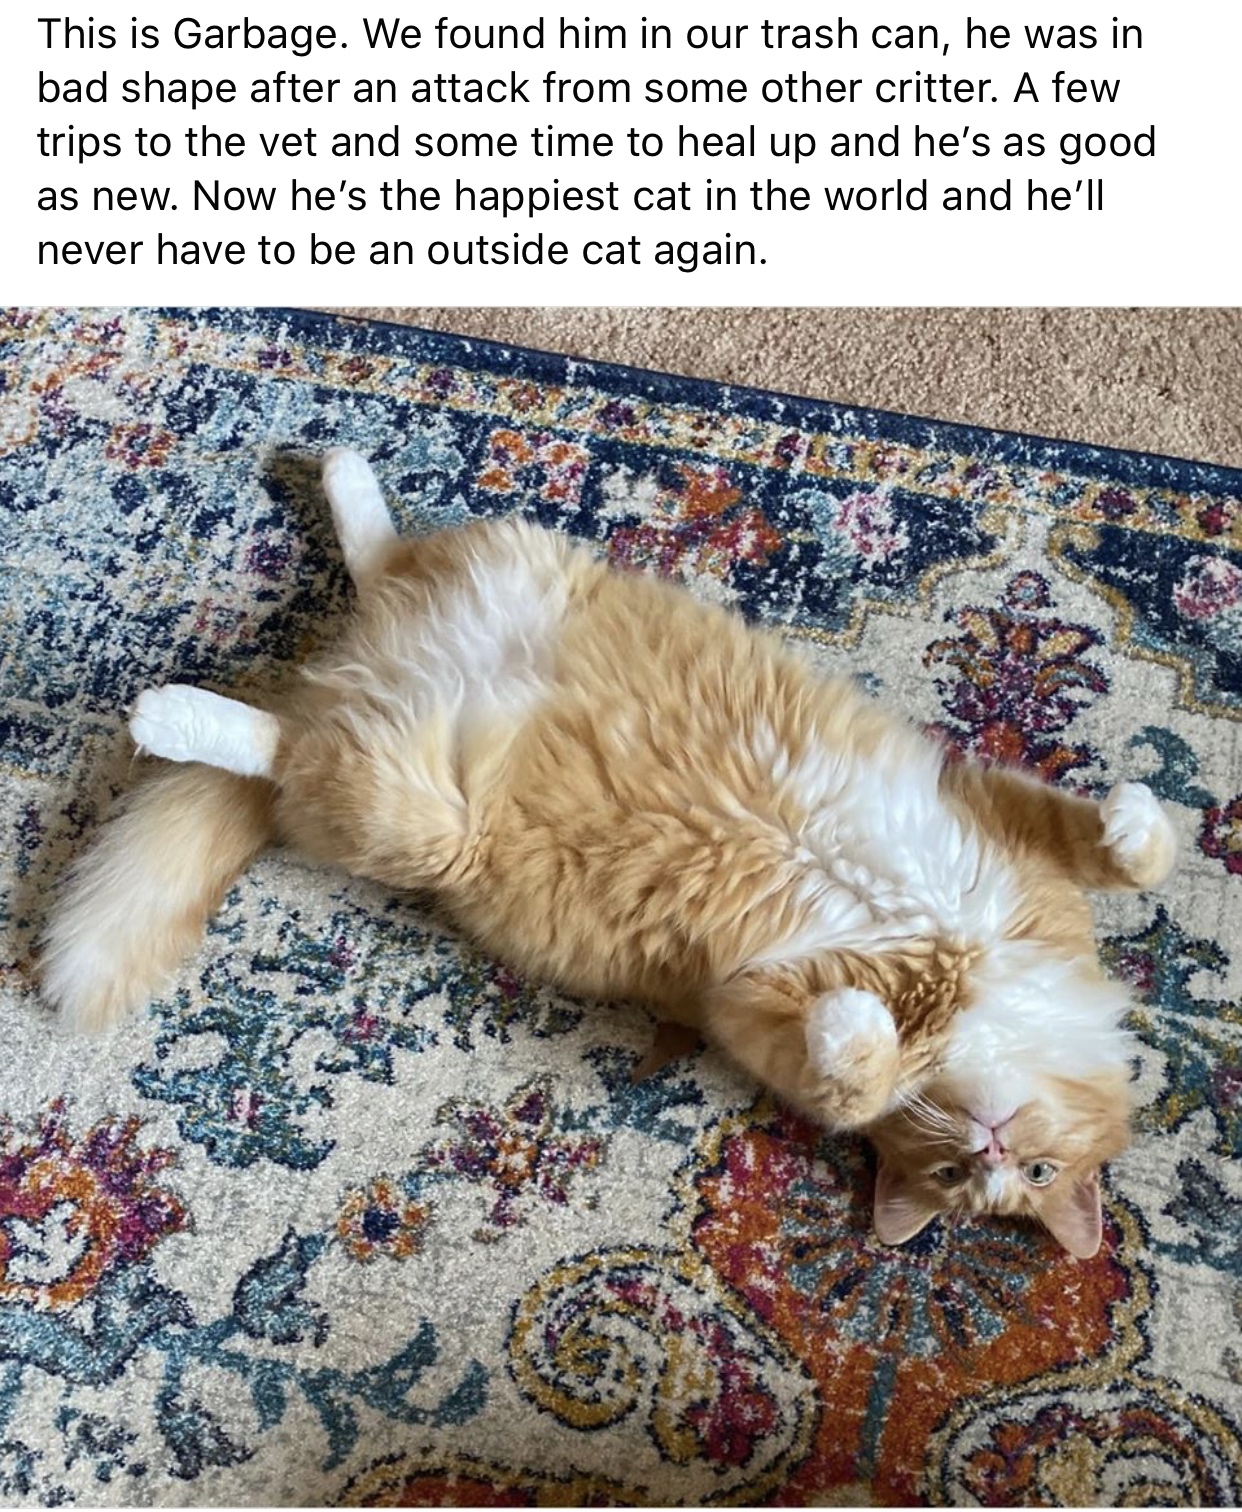 photo caption - This is Garbage. We found him in our trash can, he was in bad shape after an attack from some other critter. A few trips to the vet and some time to heal up and he's as good as new. Now he's the happiest cat in the world and he'll never ha